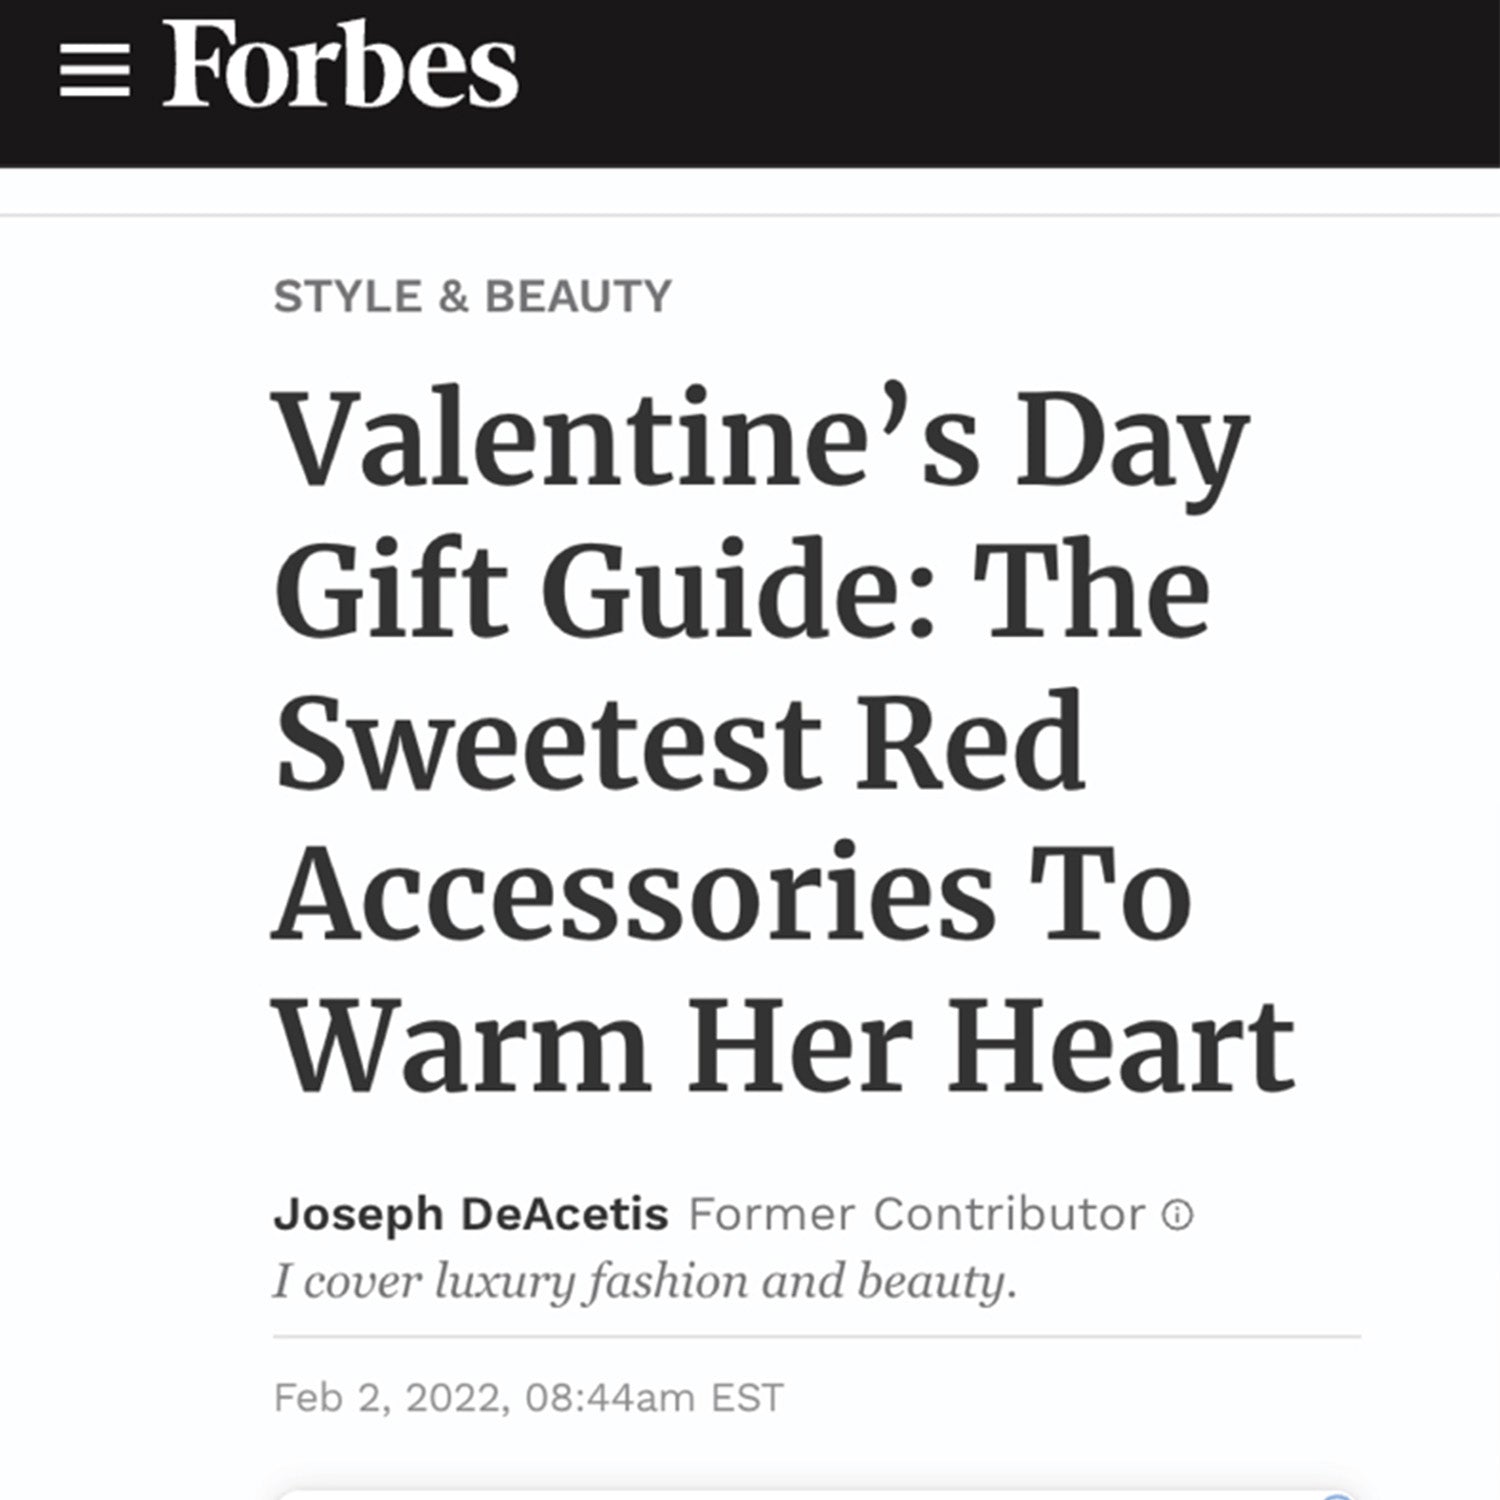 Forbes News Article - Valentine's Day Gift